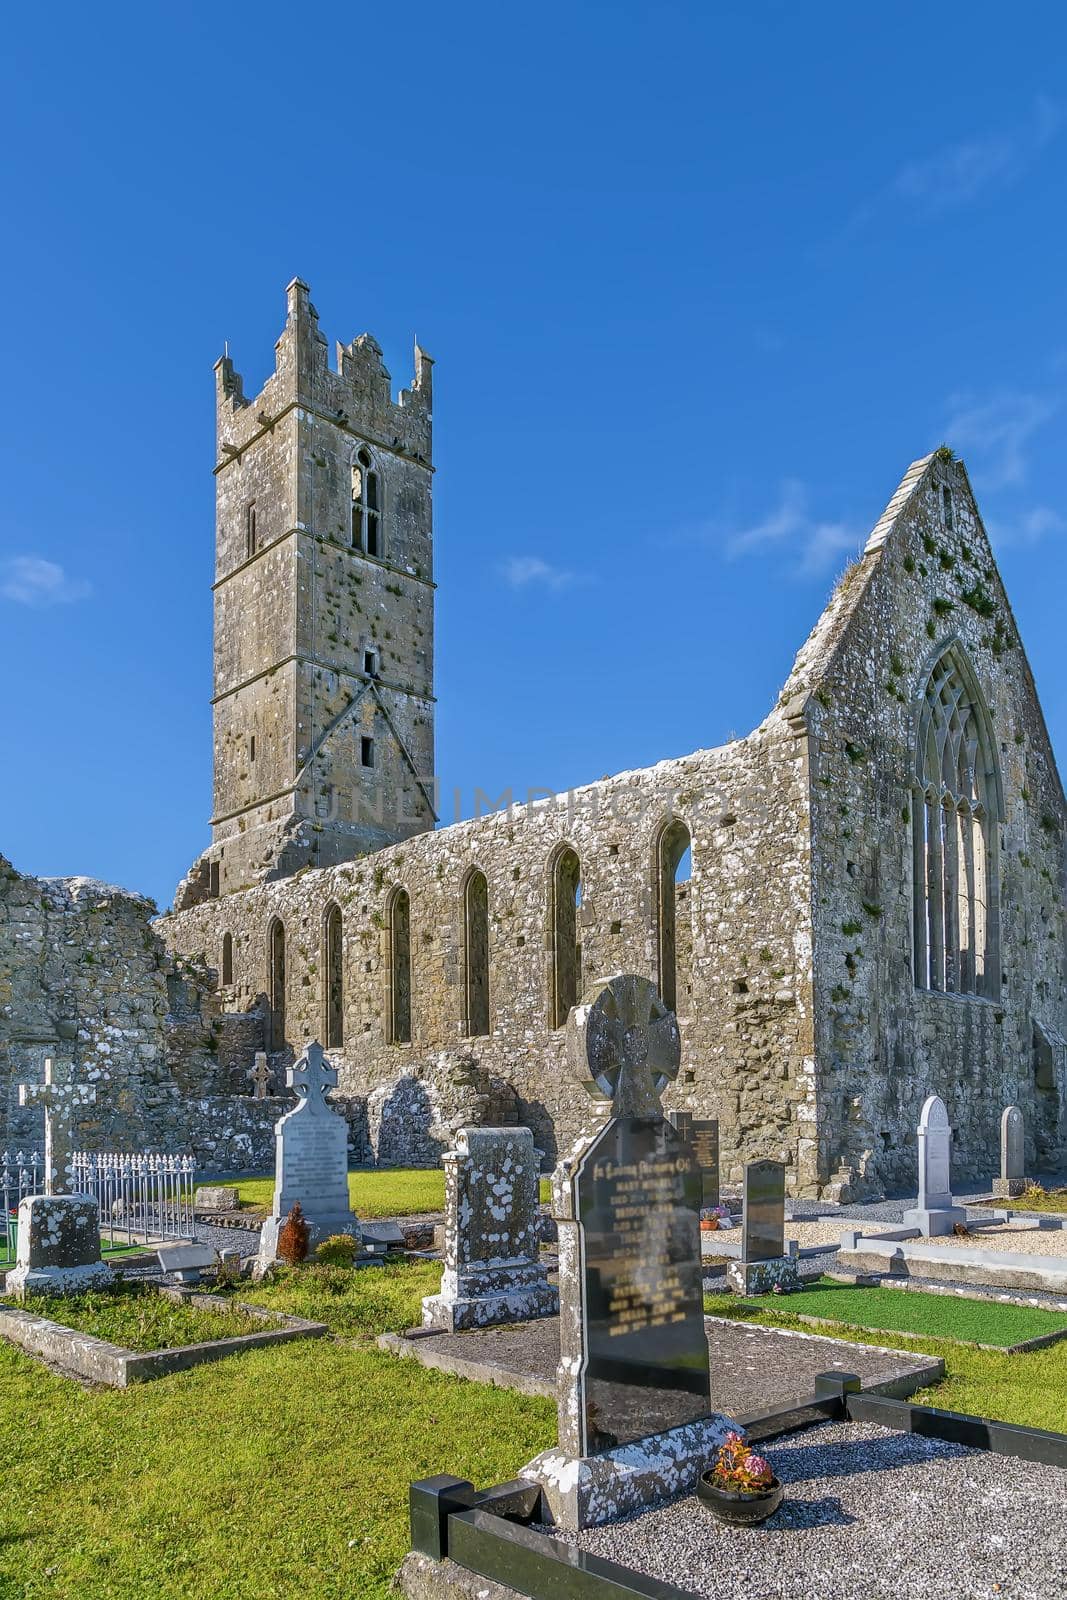 Claregalway Friary is a medieval Franciscan abbey located in the town of Claregalway, County Galway, Ireland.